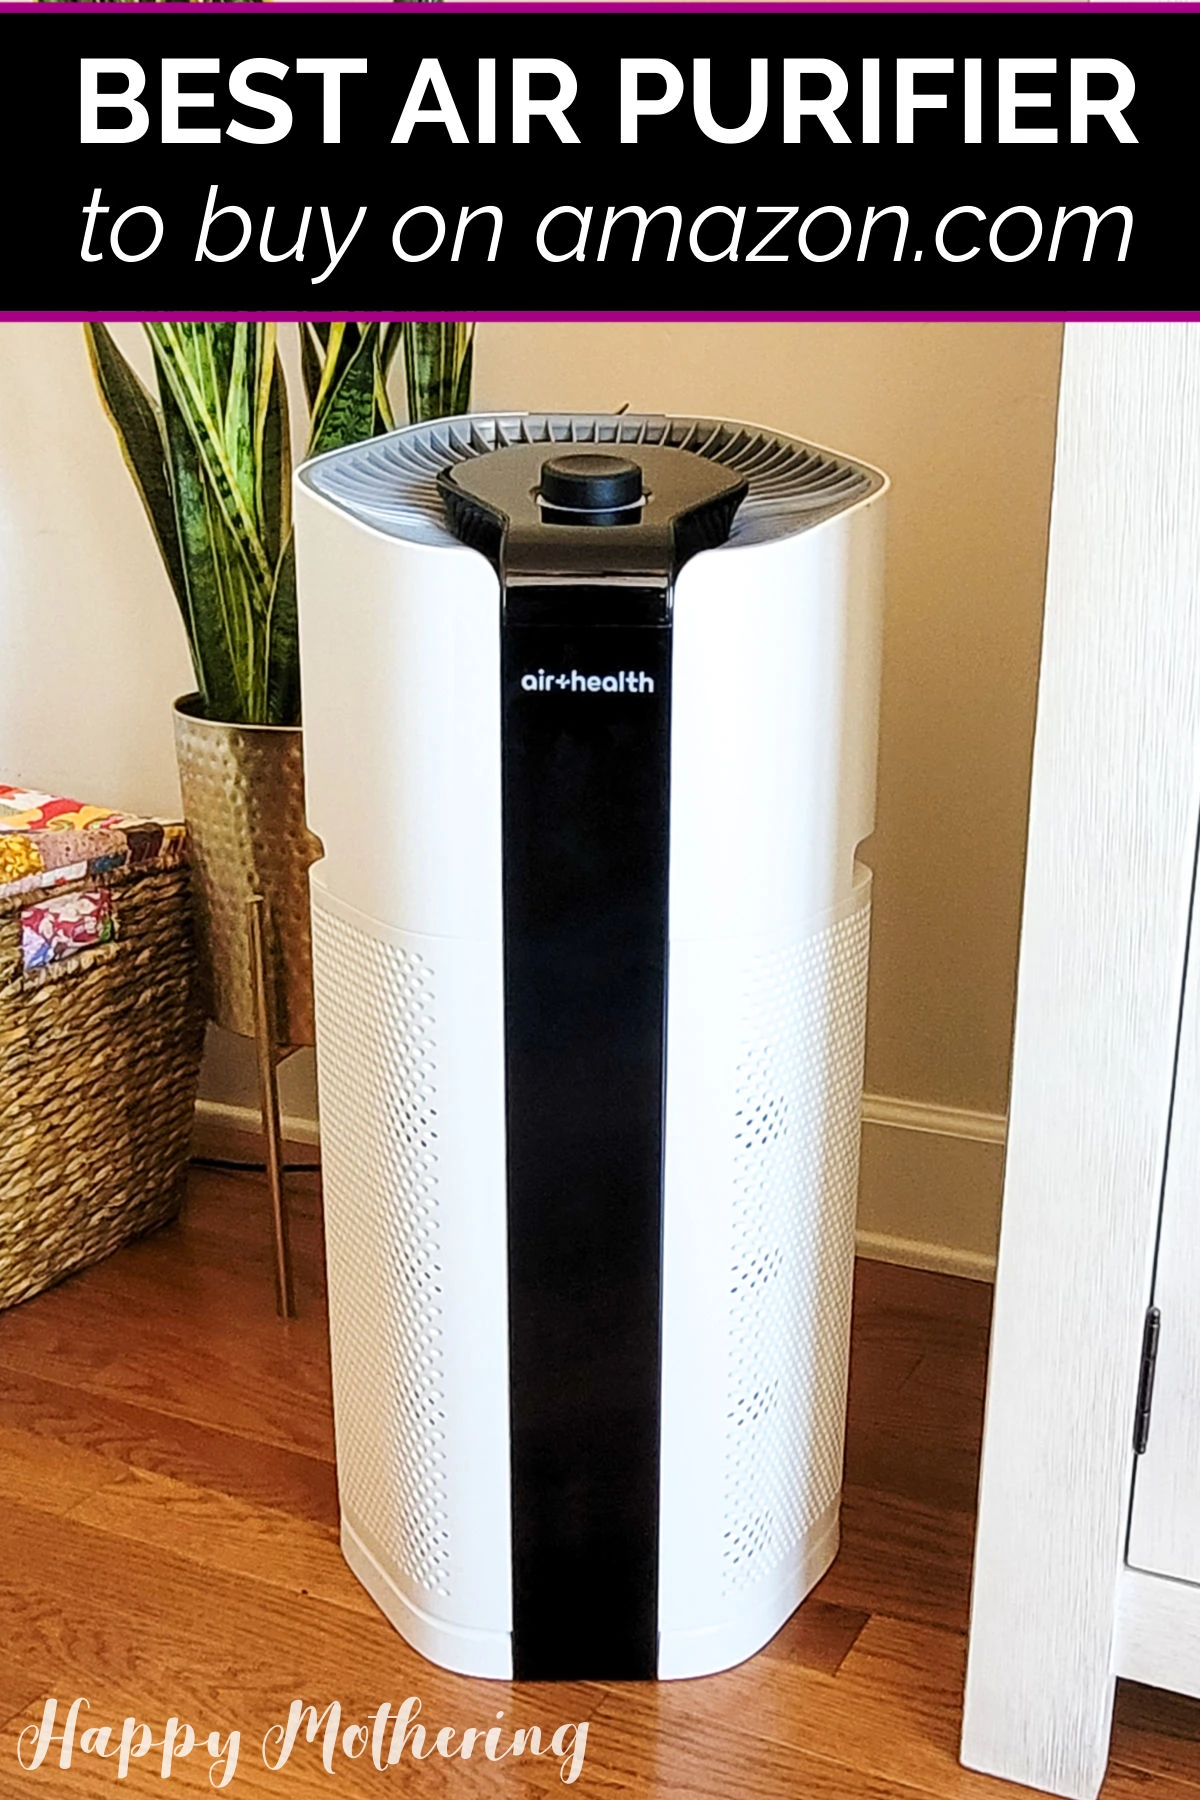 Skye Health Air Purifier working to clean the air in the living room.